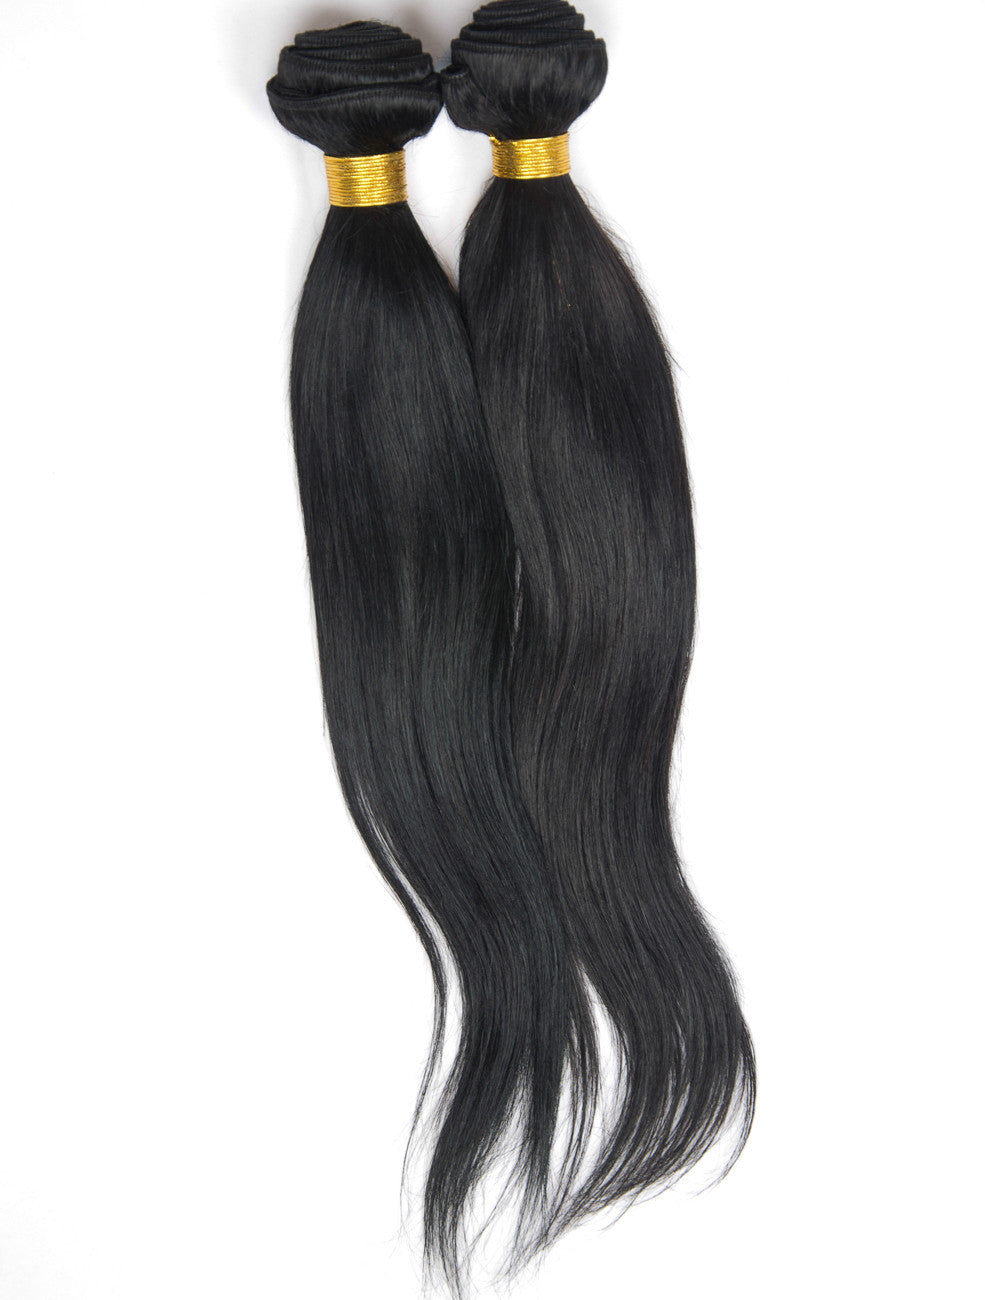 STRAIGHT MALAYSIAN WEAVE HAIRSTYLE - 3